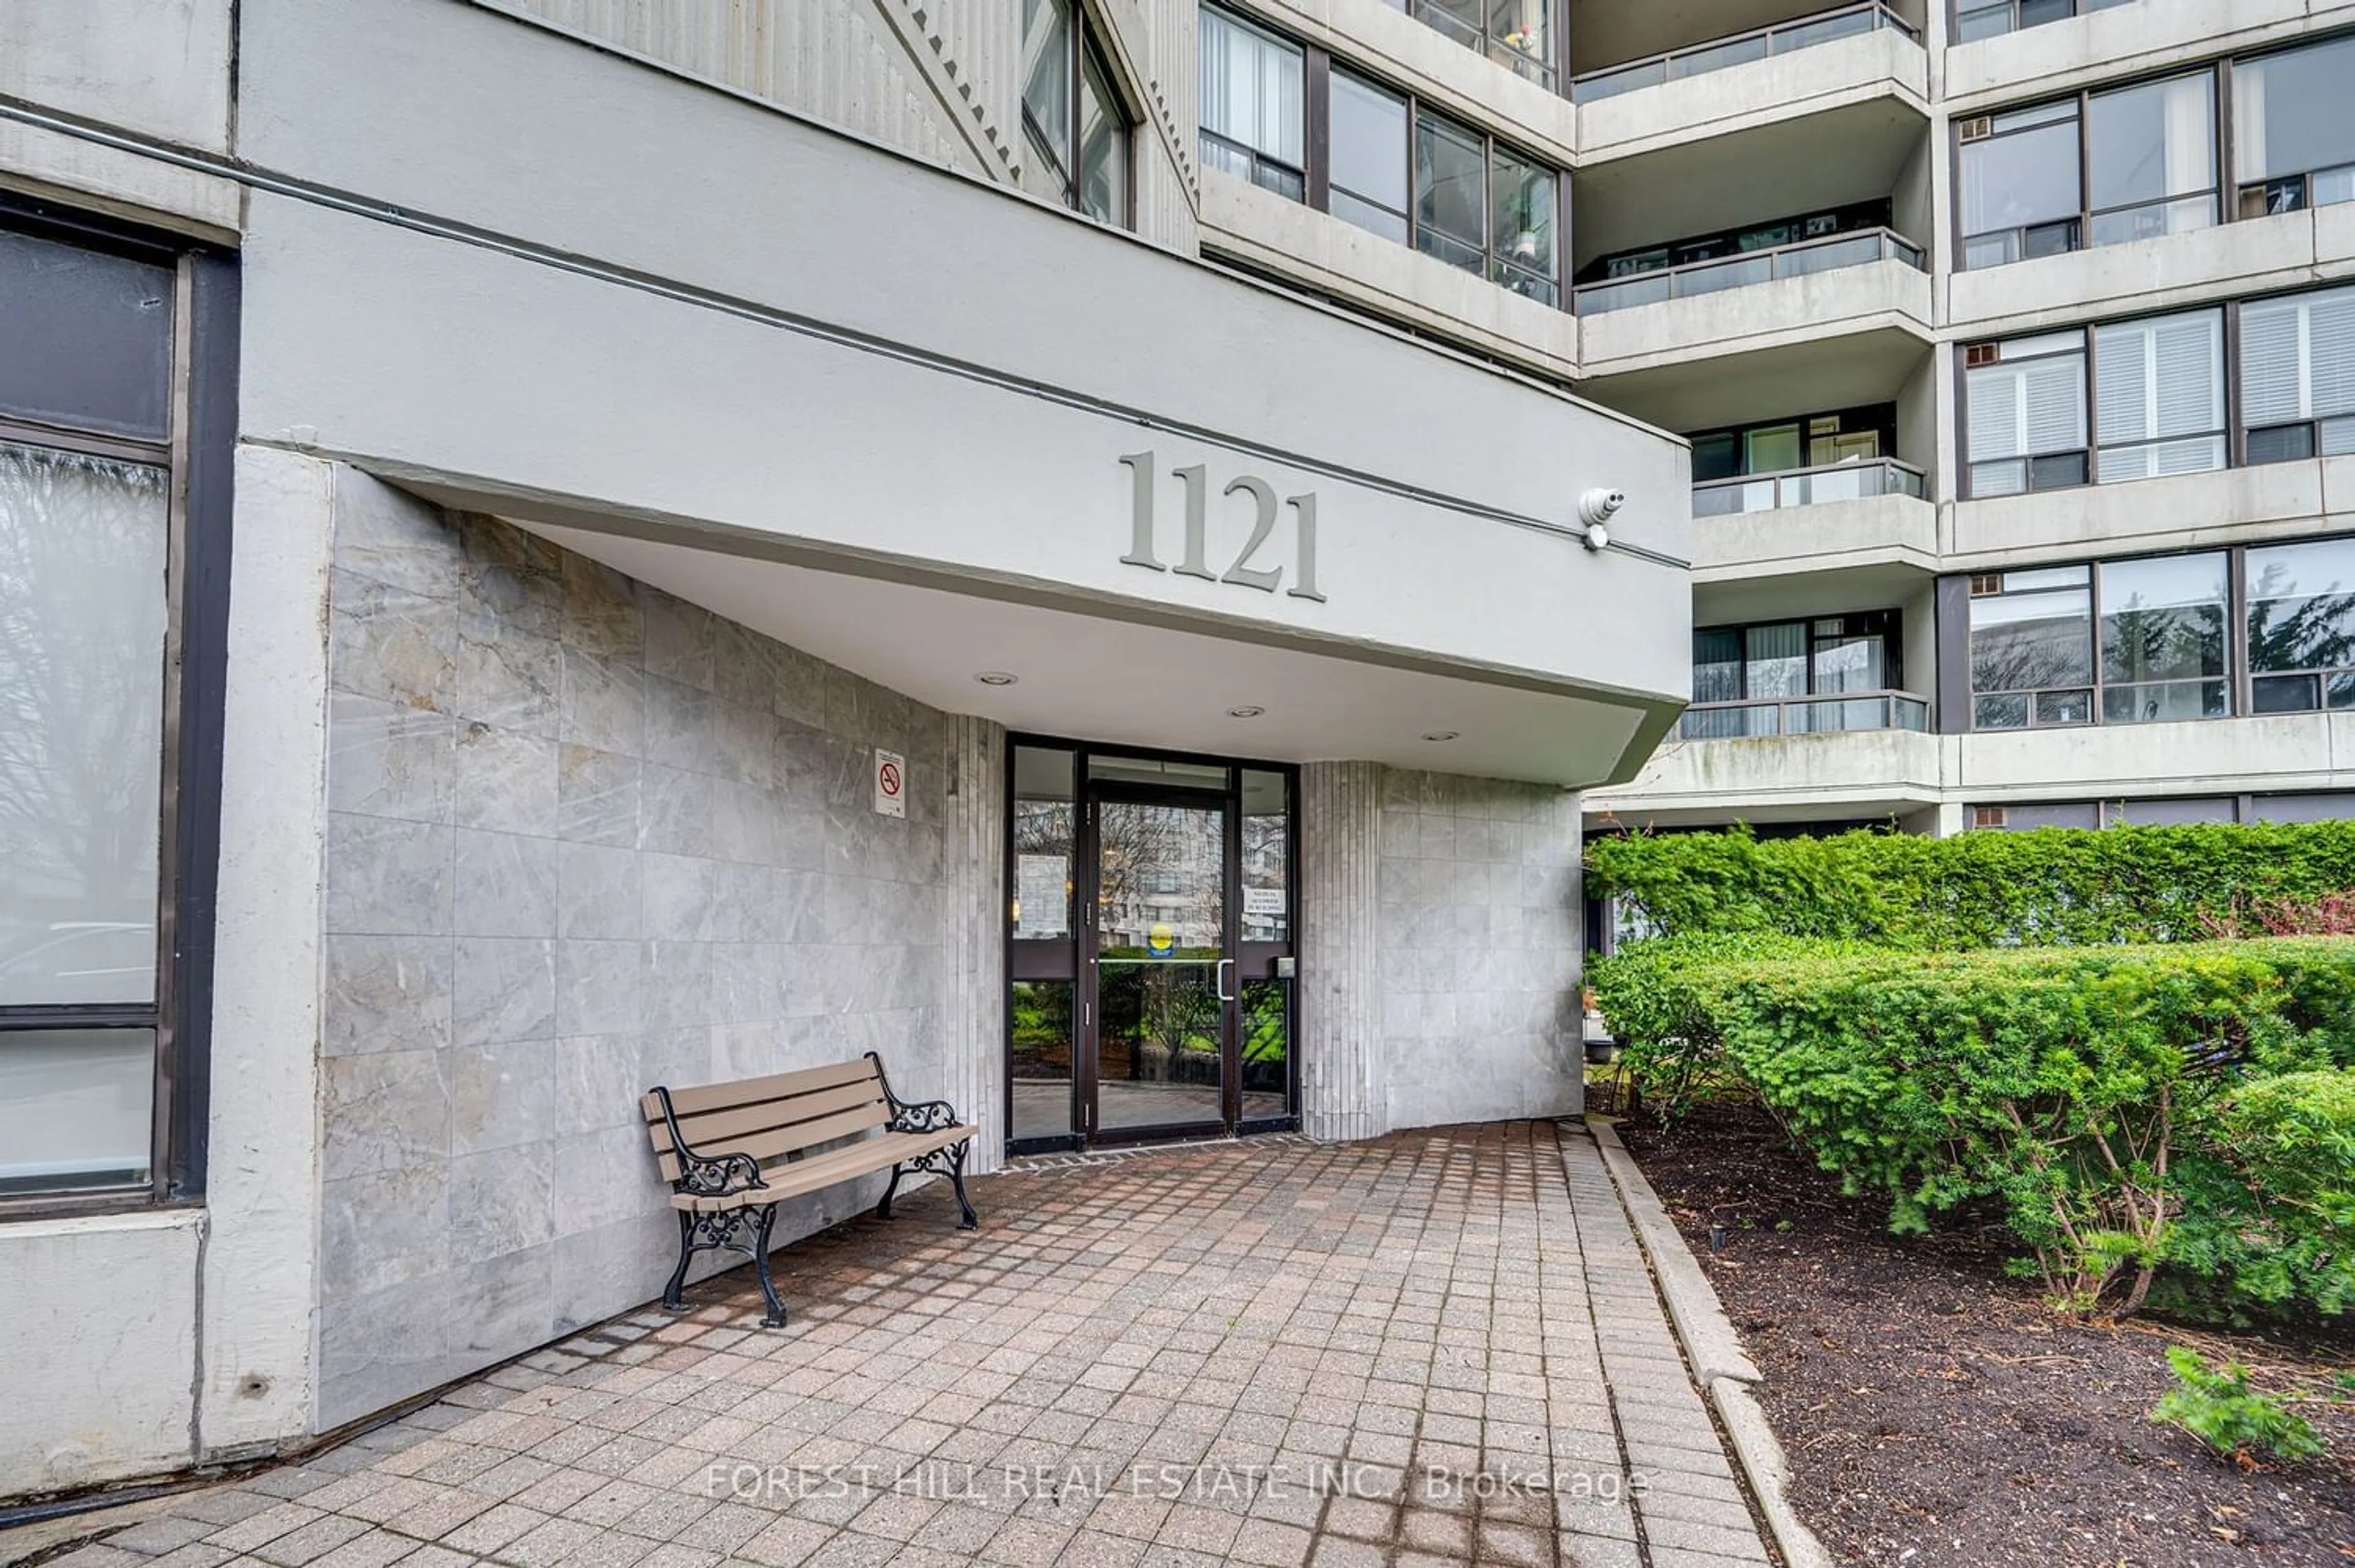 A pic from exterior of the house or condo for 1121 Steeles Ave #702, Toronto Ontario M2R 3W7